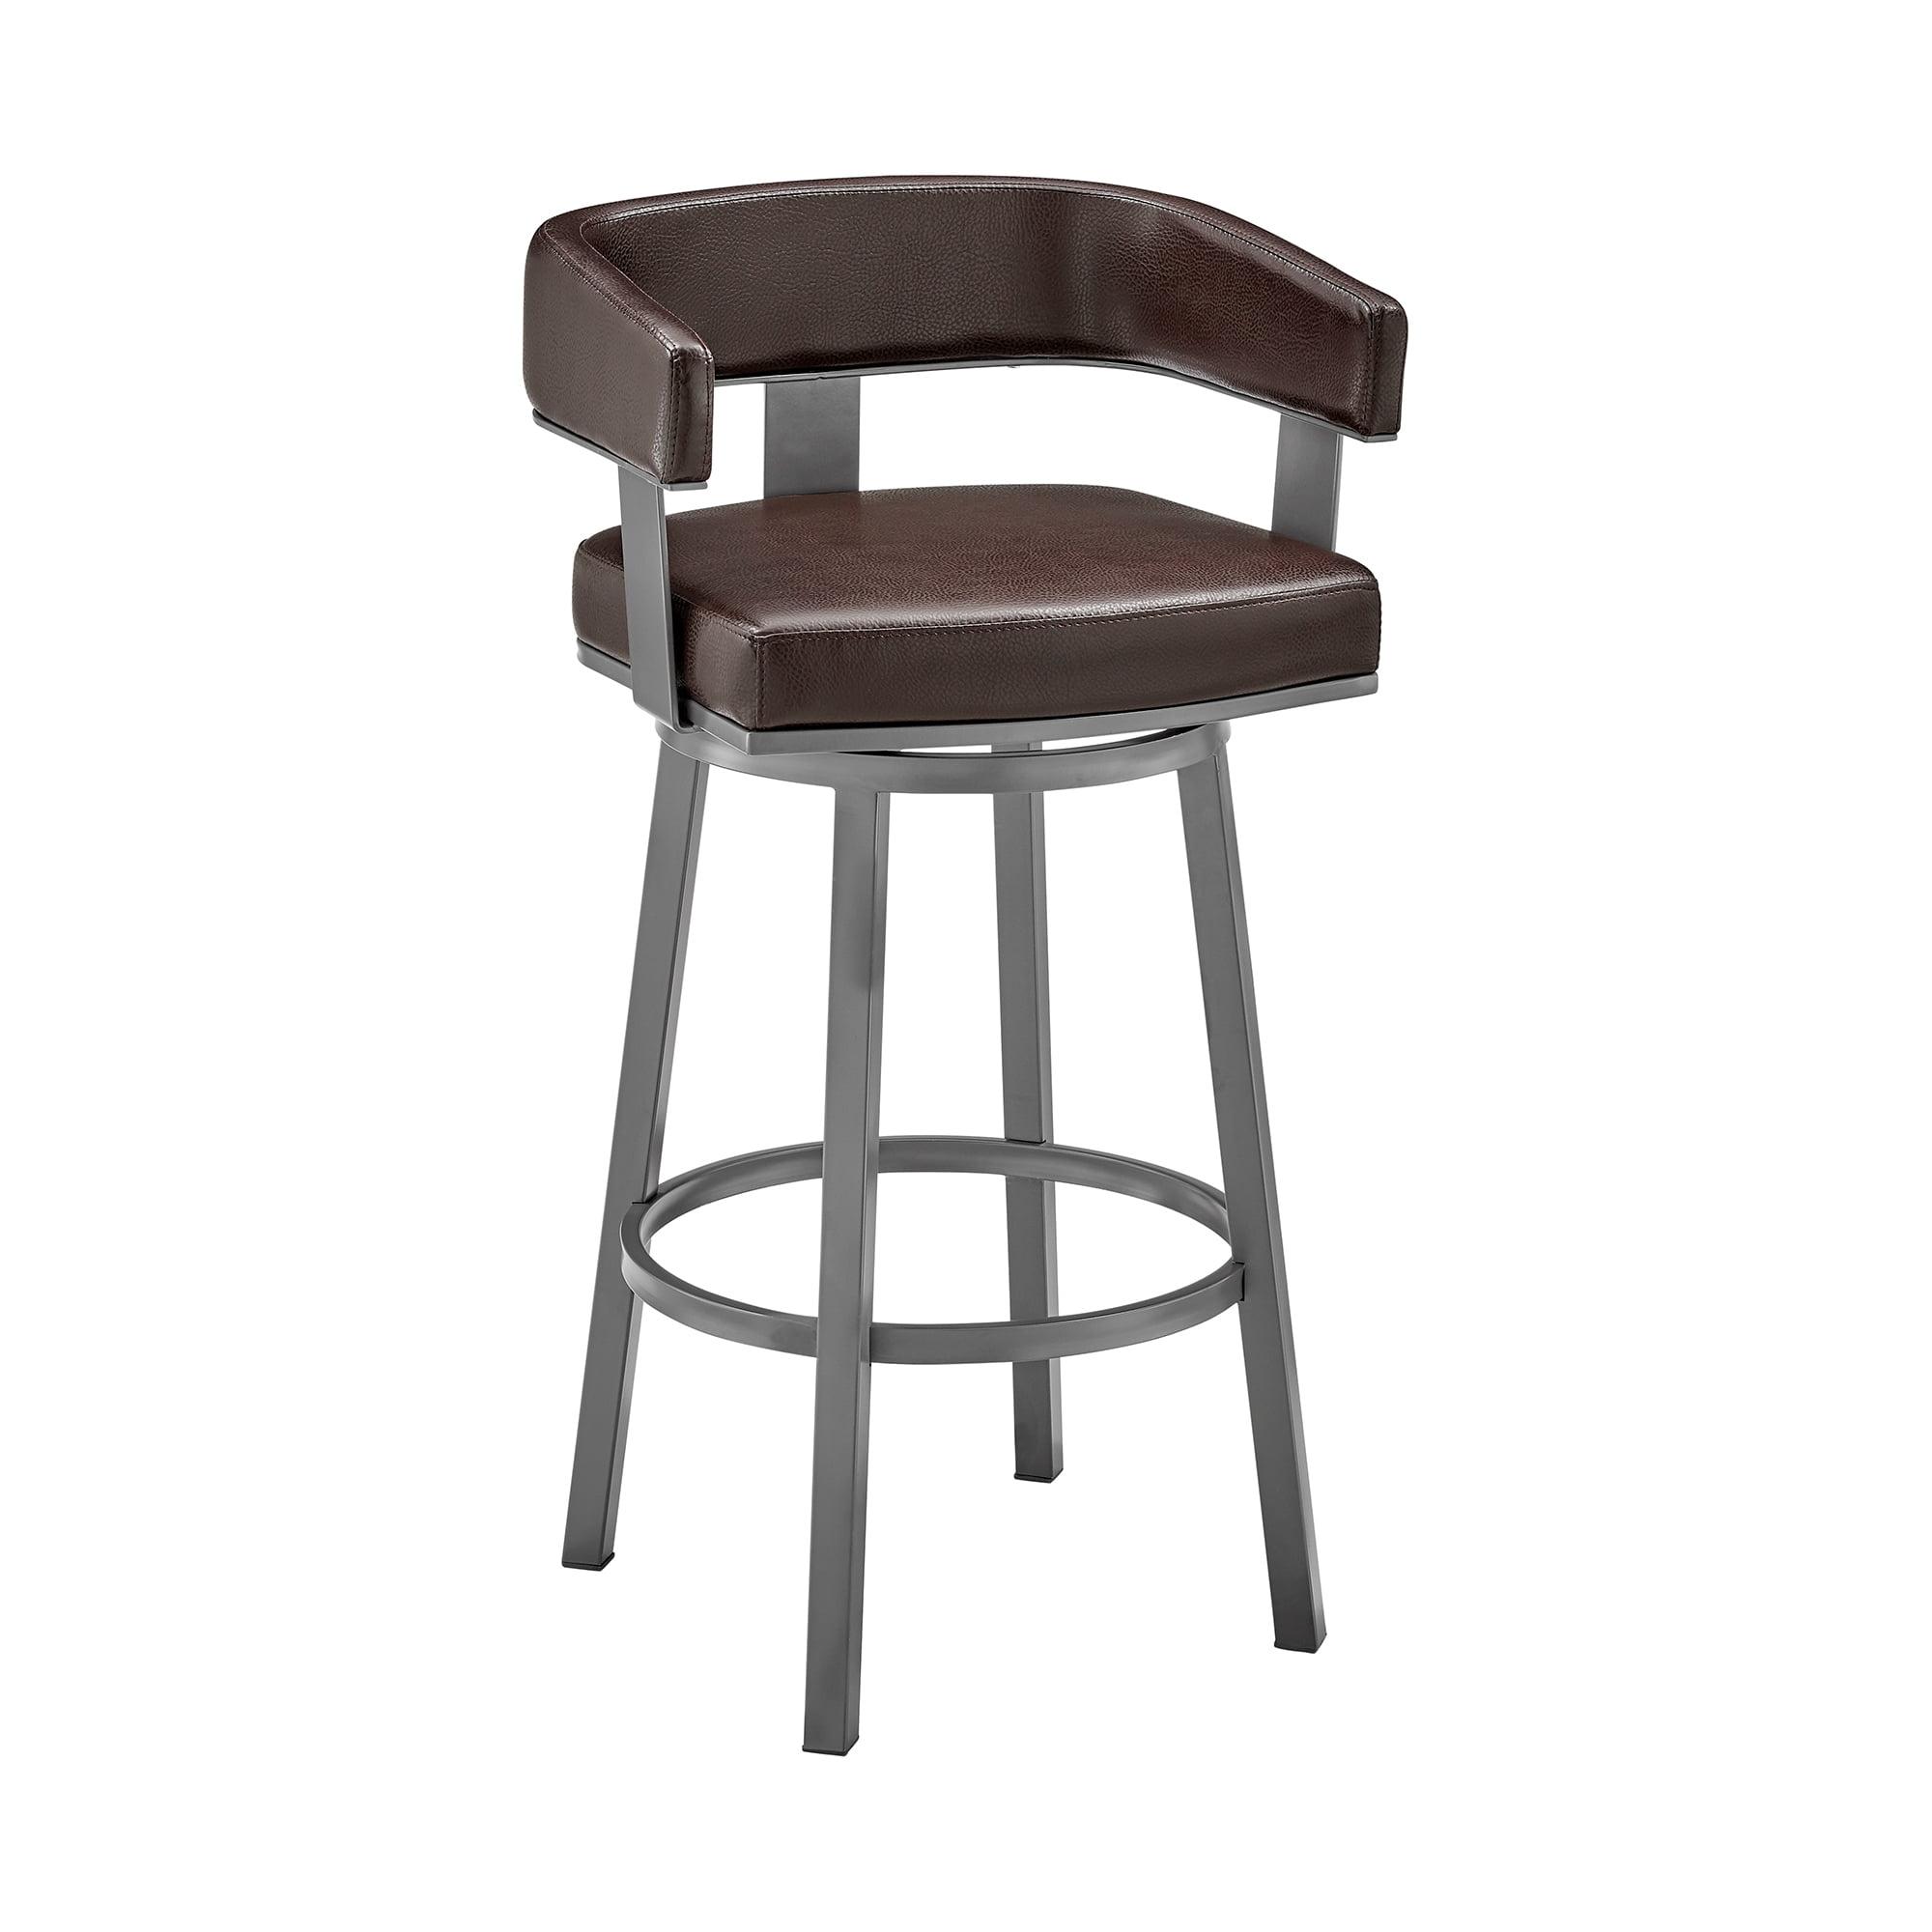 Java Brown Faux Leather Swivel Bar Stool with Metal Frame